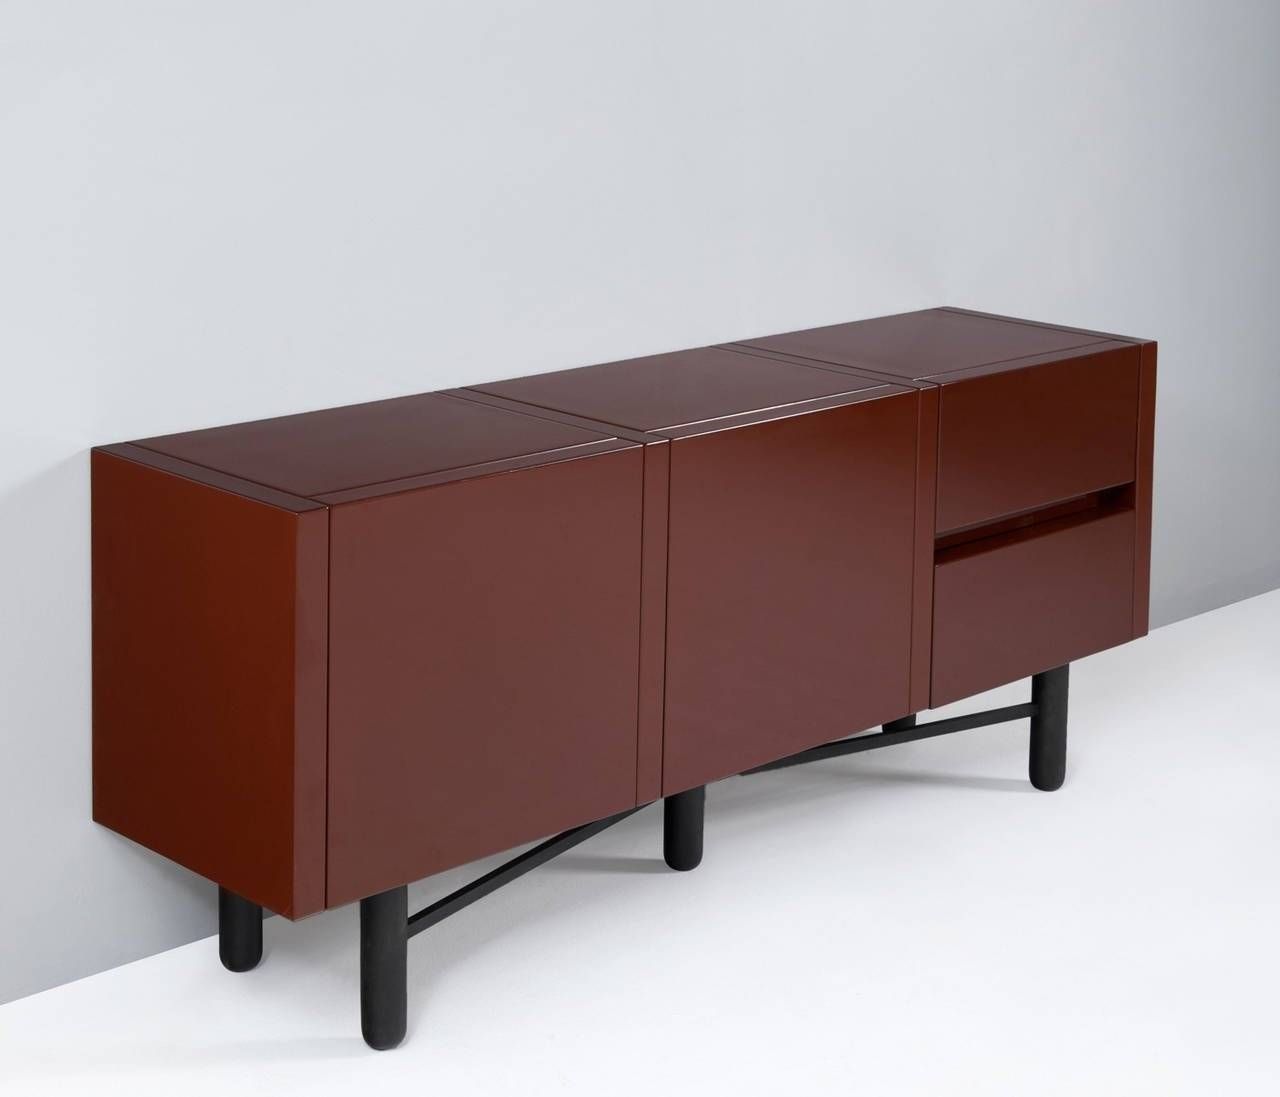 Roche Bobois Red Lacquered High Gloss Sideboard For Sale At 1stdibs With 2017 Roche Bobois Sideboards (View 6 of 15)